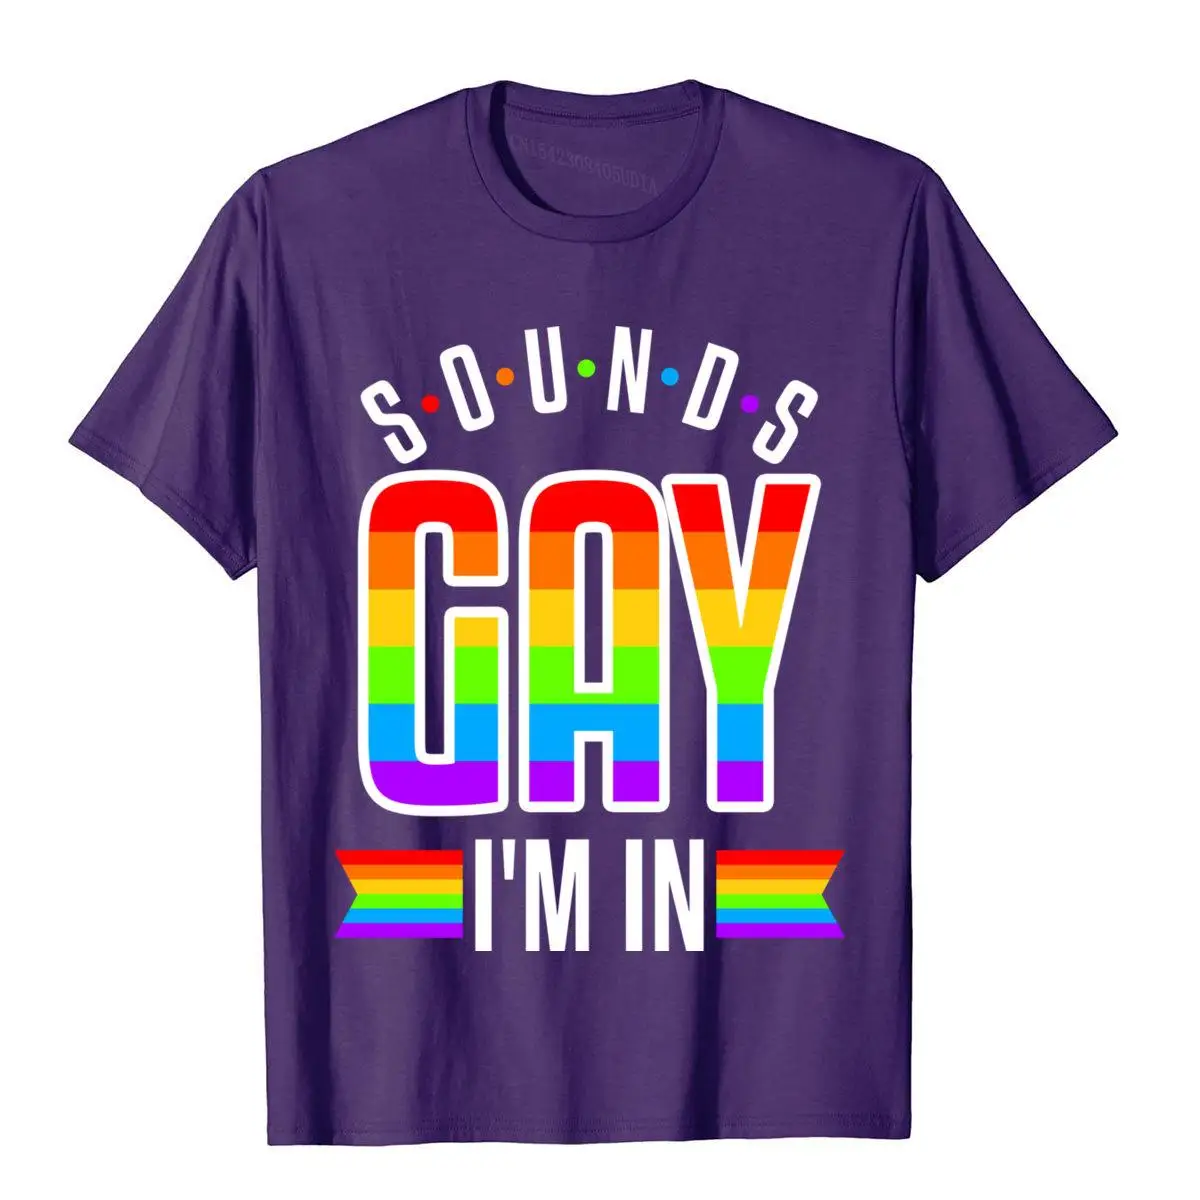 Sounds Gay Funny Pride LGBT Gift Lesbian Christmas Gift Pullover Hoodie__B12896purple